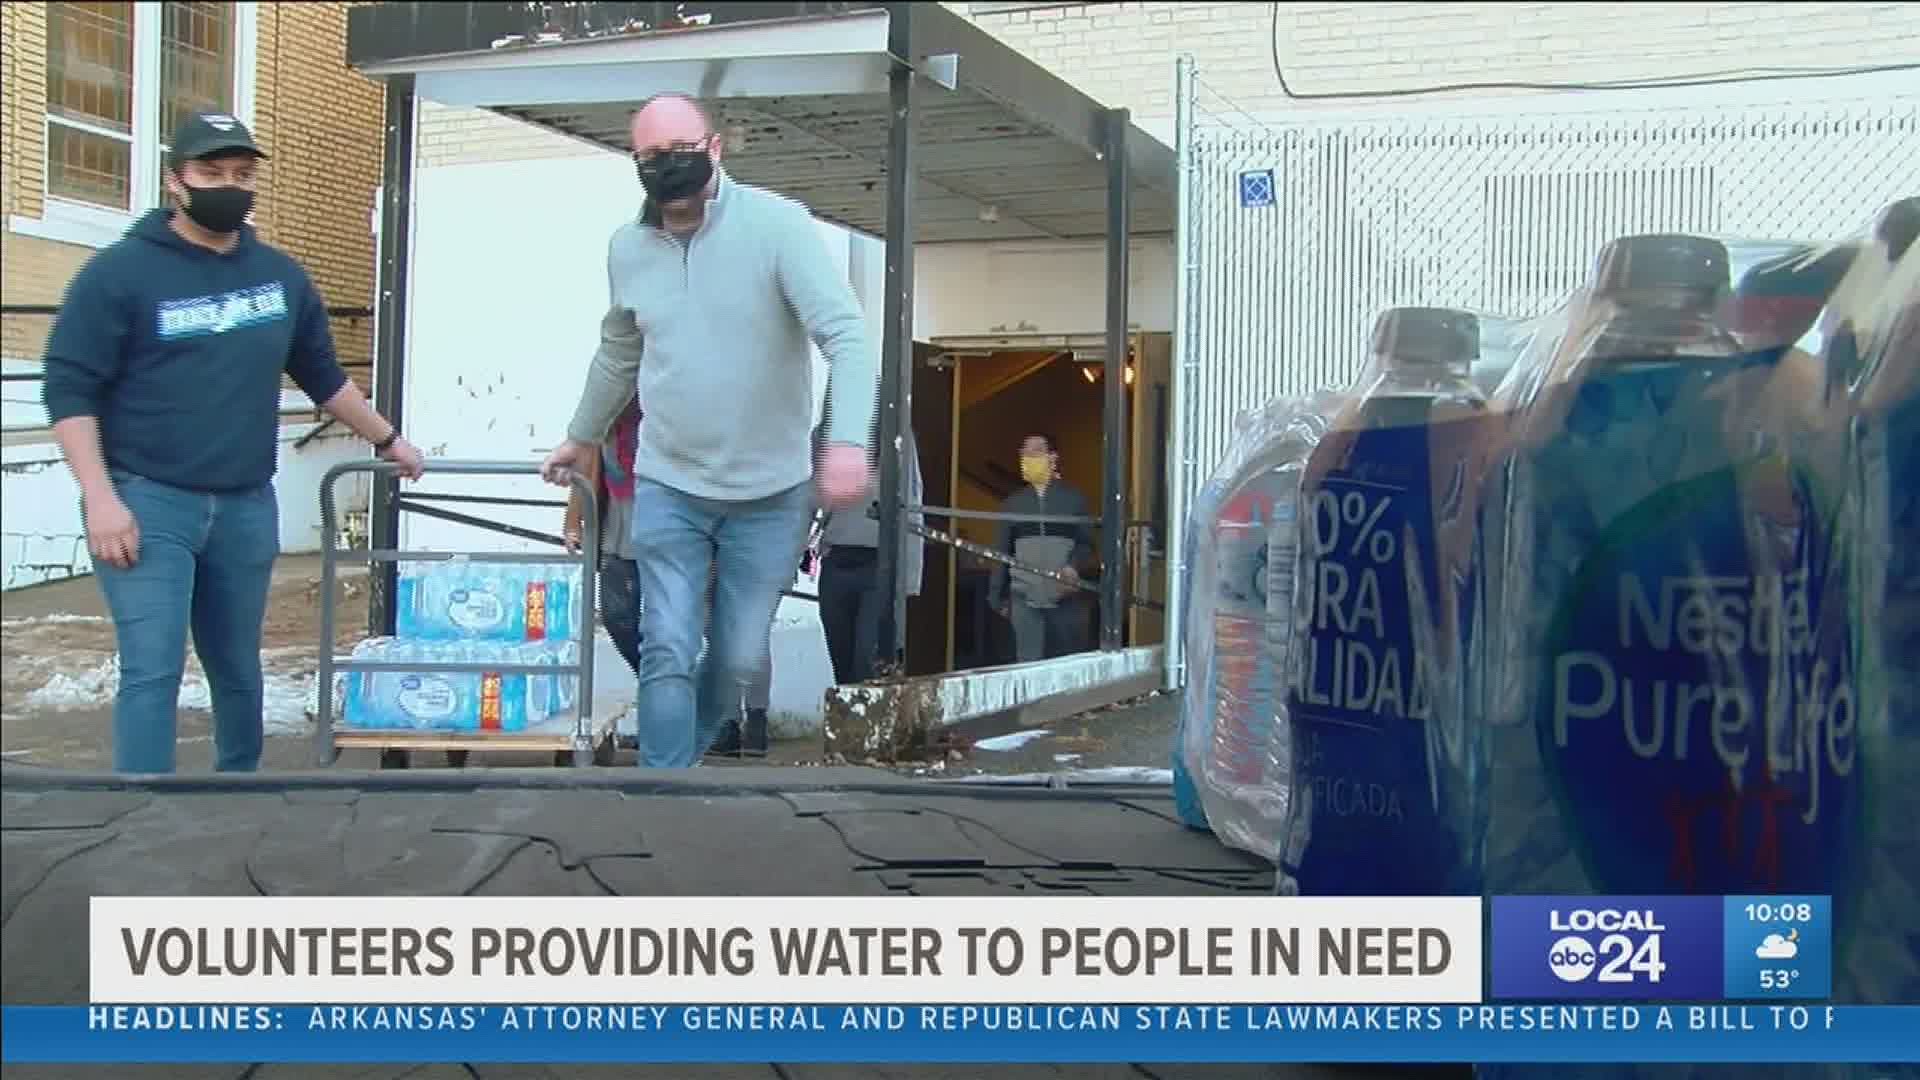 Volunteers brought bottled water to families in need.